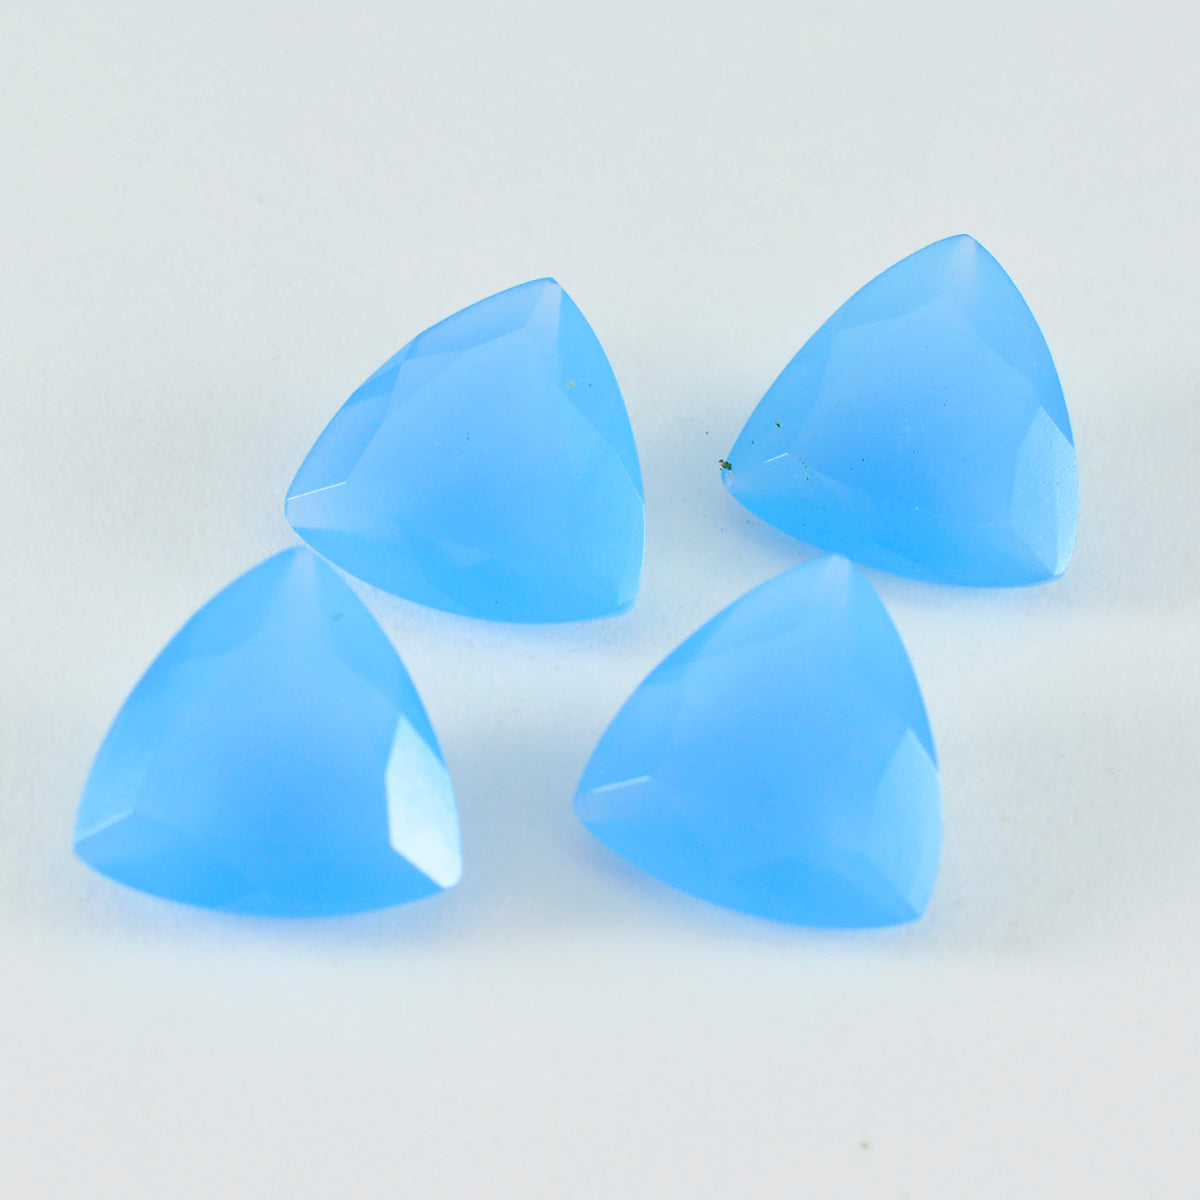 Riyogems 1PC Real Blue Chalcedony Faceted 11x11 mm Trillion Shape startling Quality Loose Gems